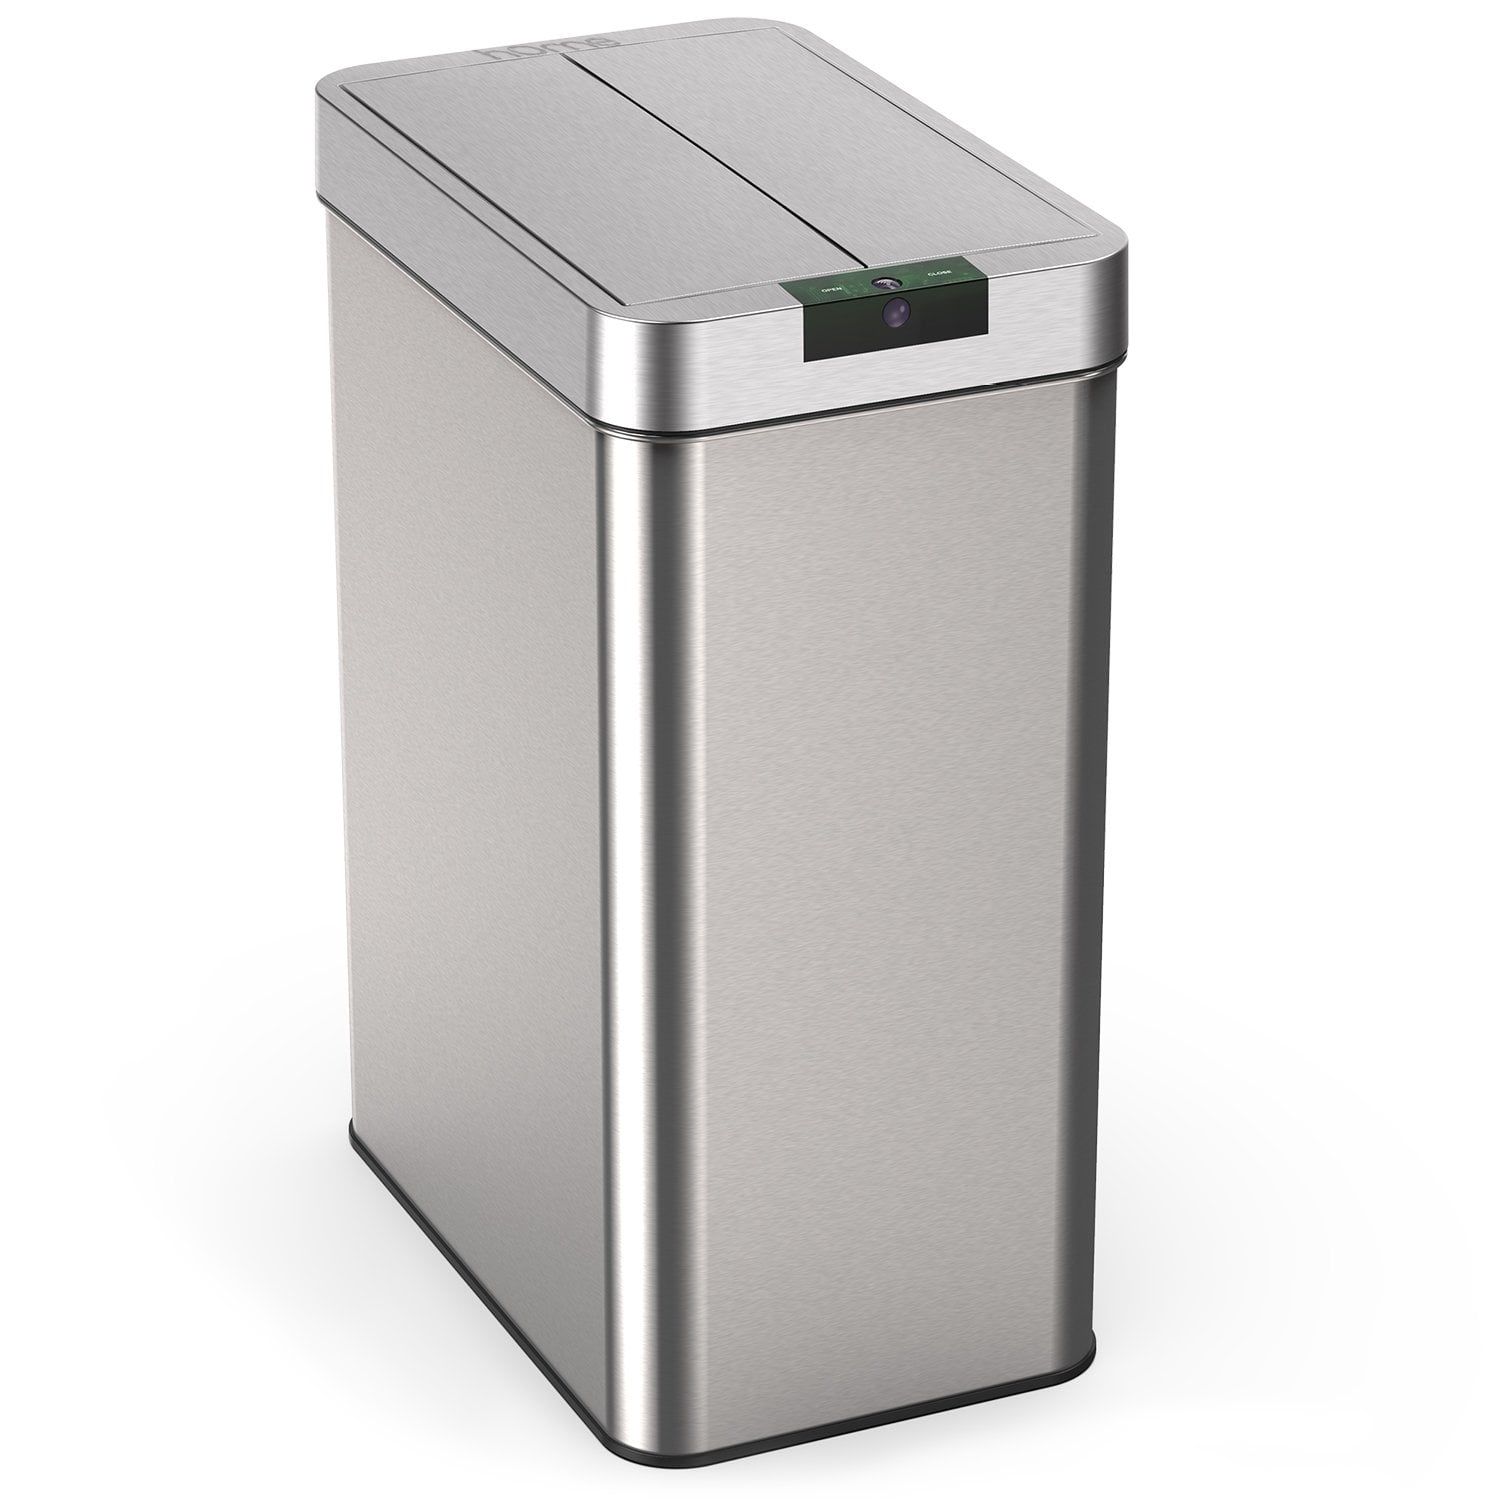 Details about   Electrical Automatic Garbage Bin Smart Touch Mode Trash Cans Home Essentials New 